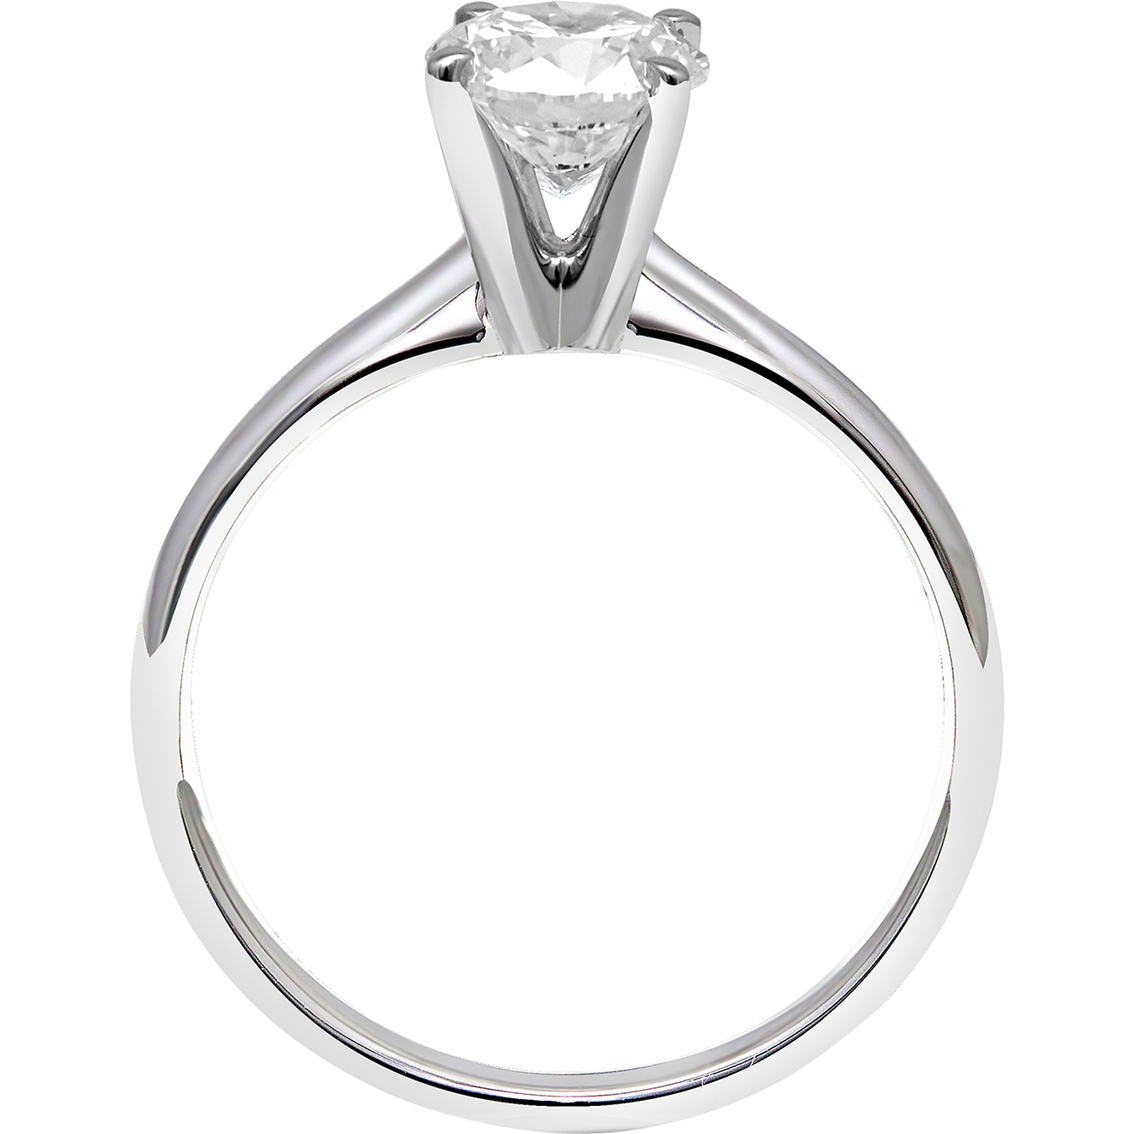 Ray of Brilliance 14K White Gold 1 1/2 ct. Lab Grown Diamond Solitaire Ring - Image 4 of 4